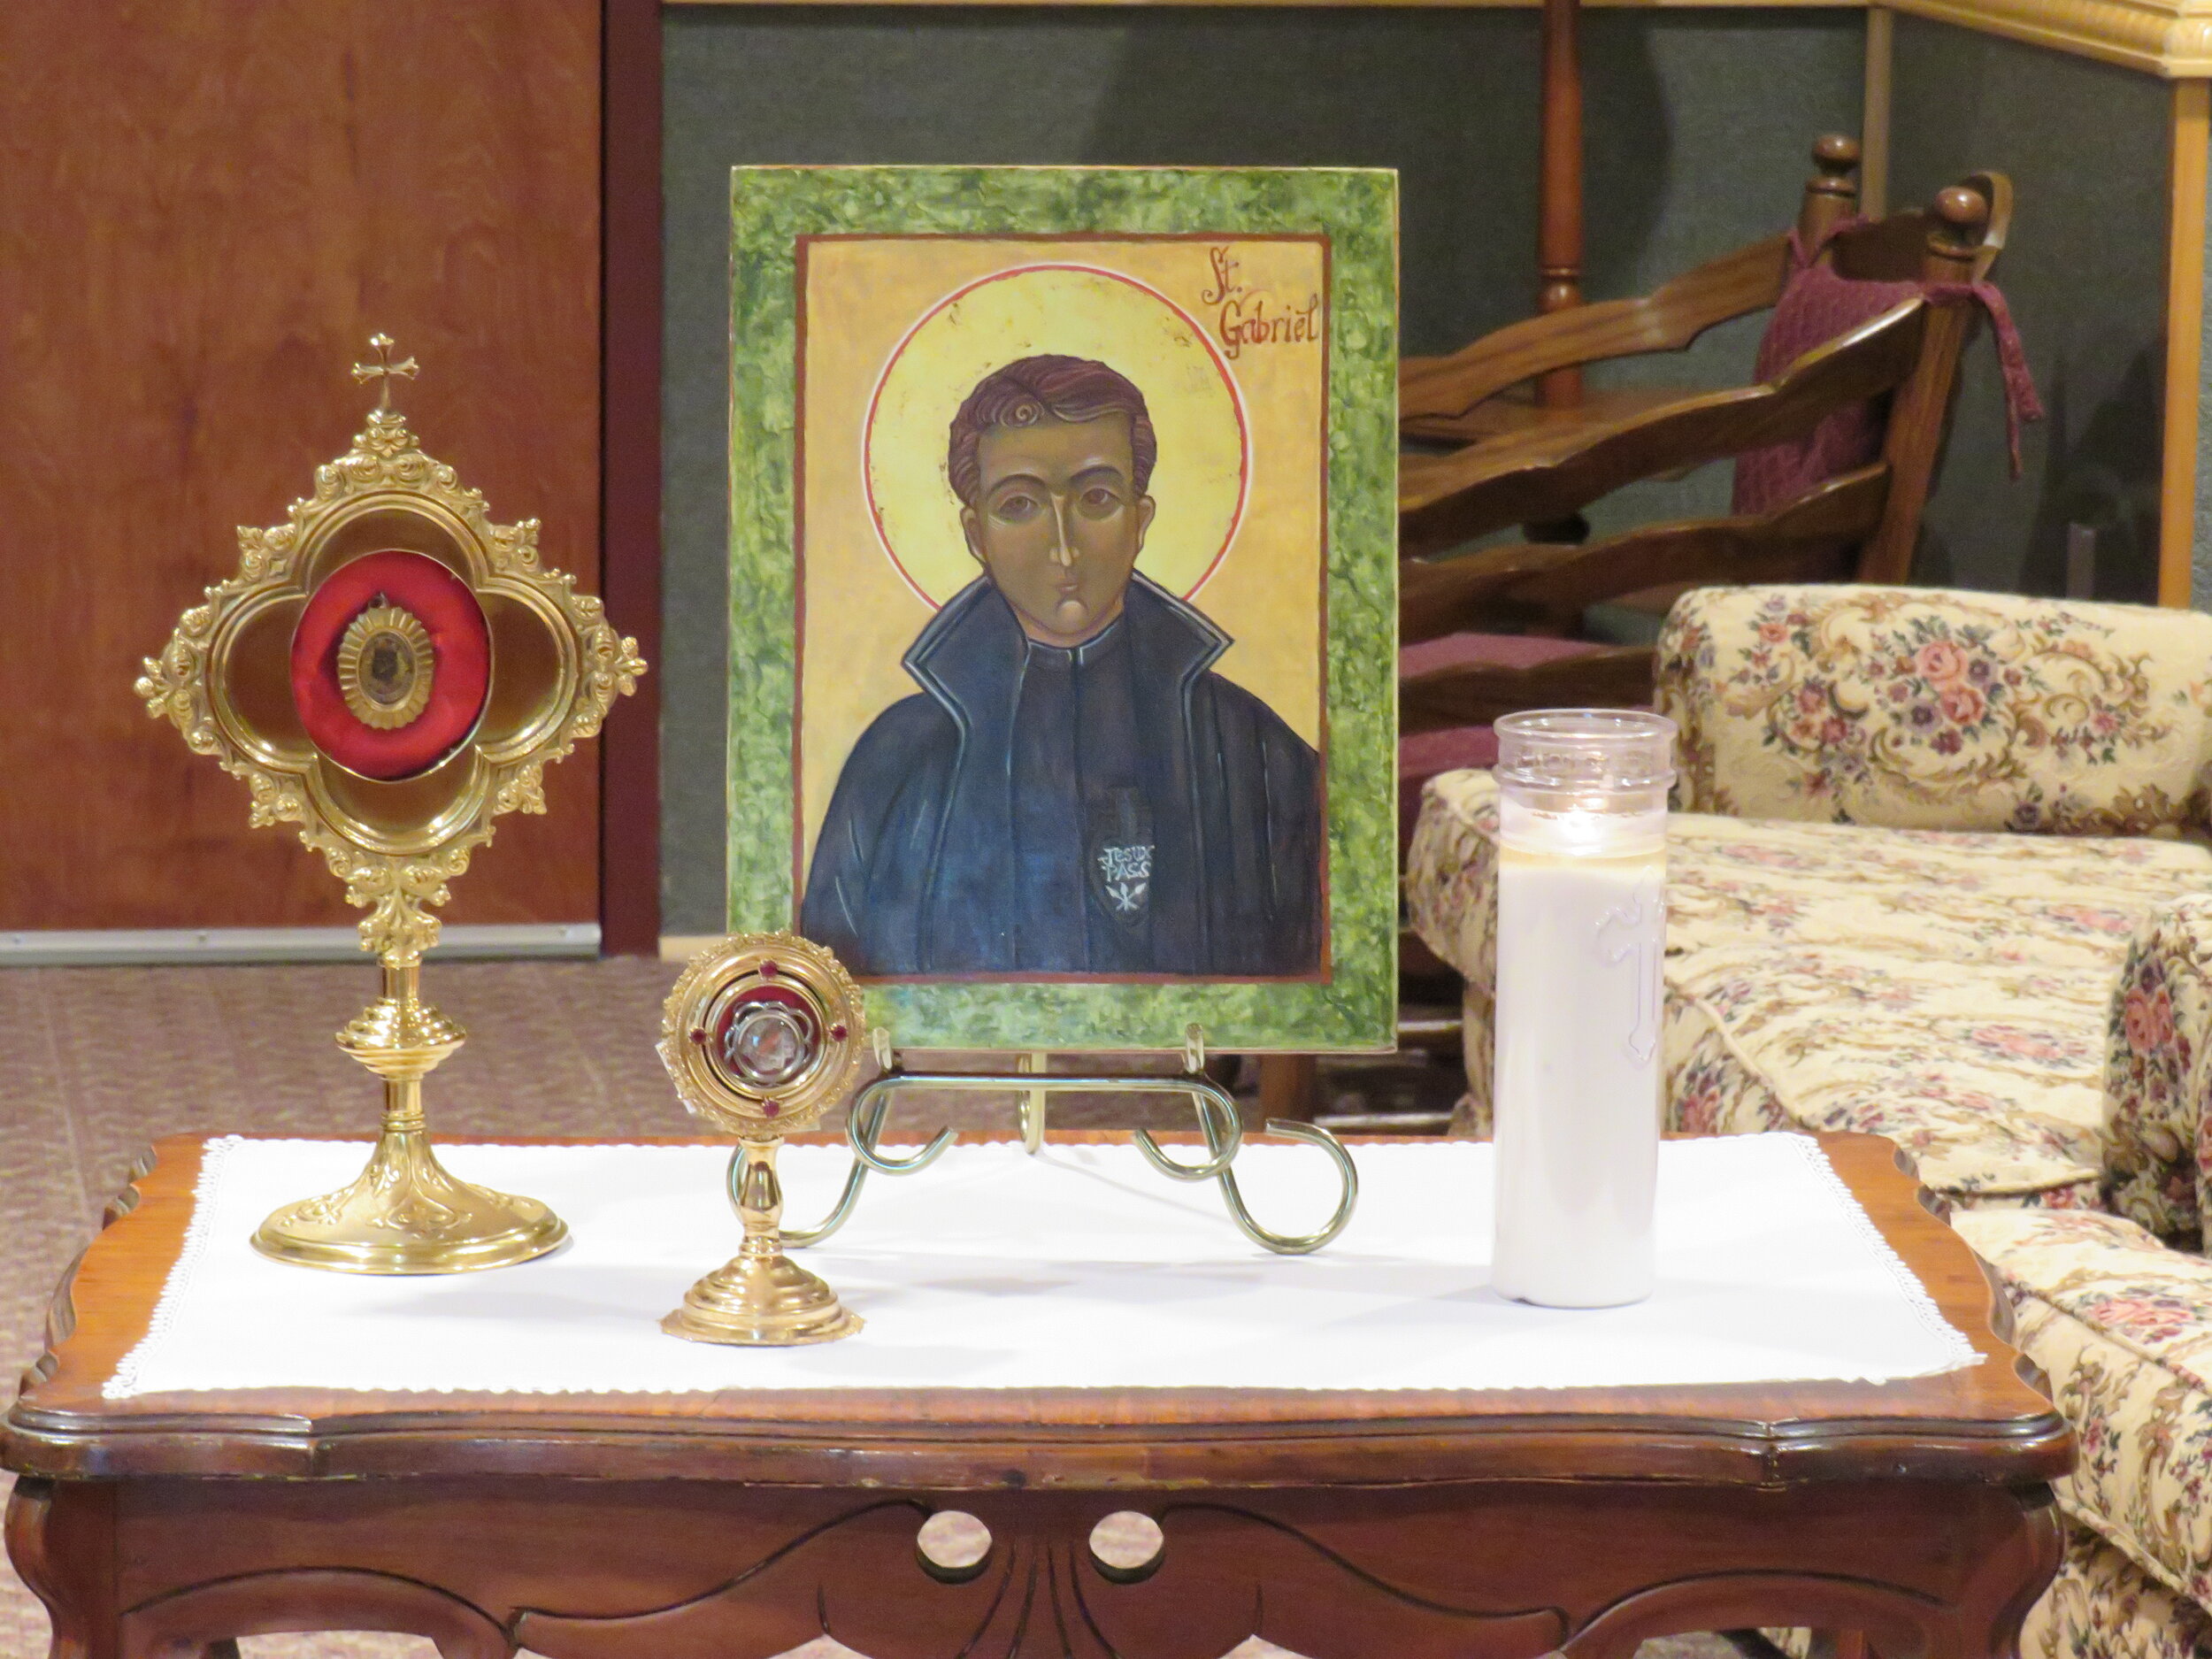  An icon of St. Gabriel, written by Joan Gleeson, with relics of the saint and of Ven. Mother Mary Crucified, the first Passionist nun 